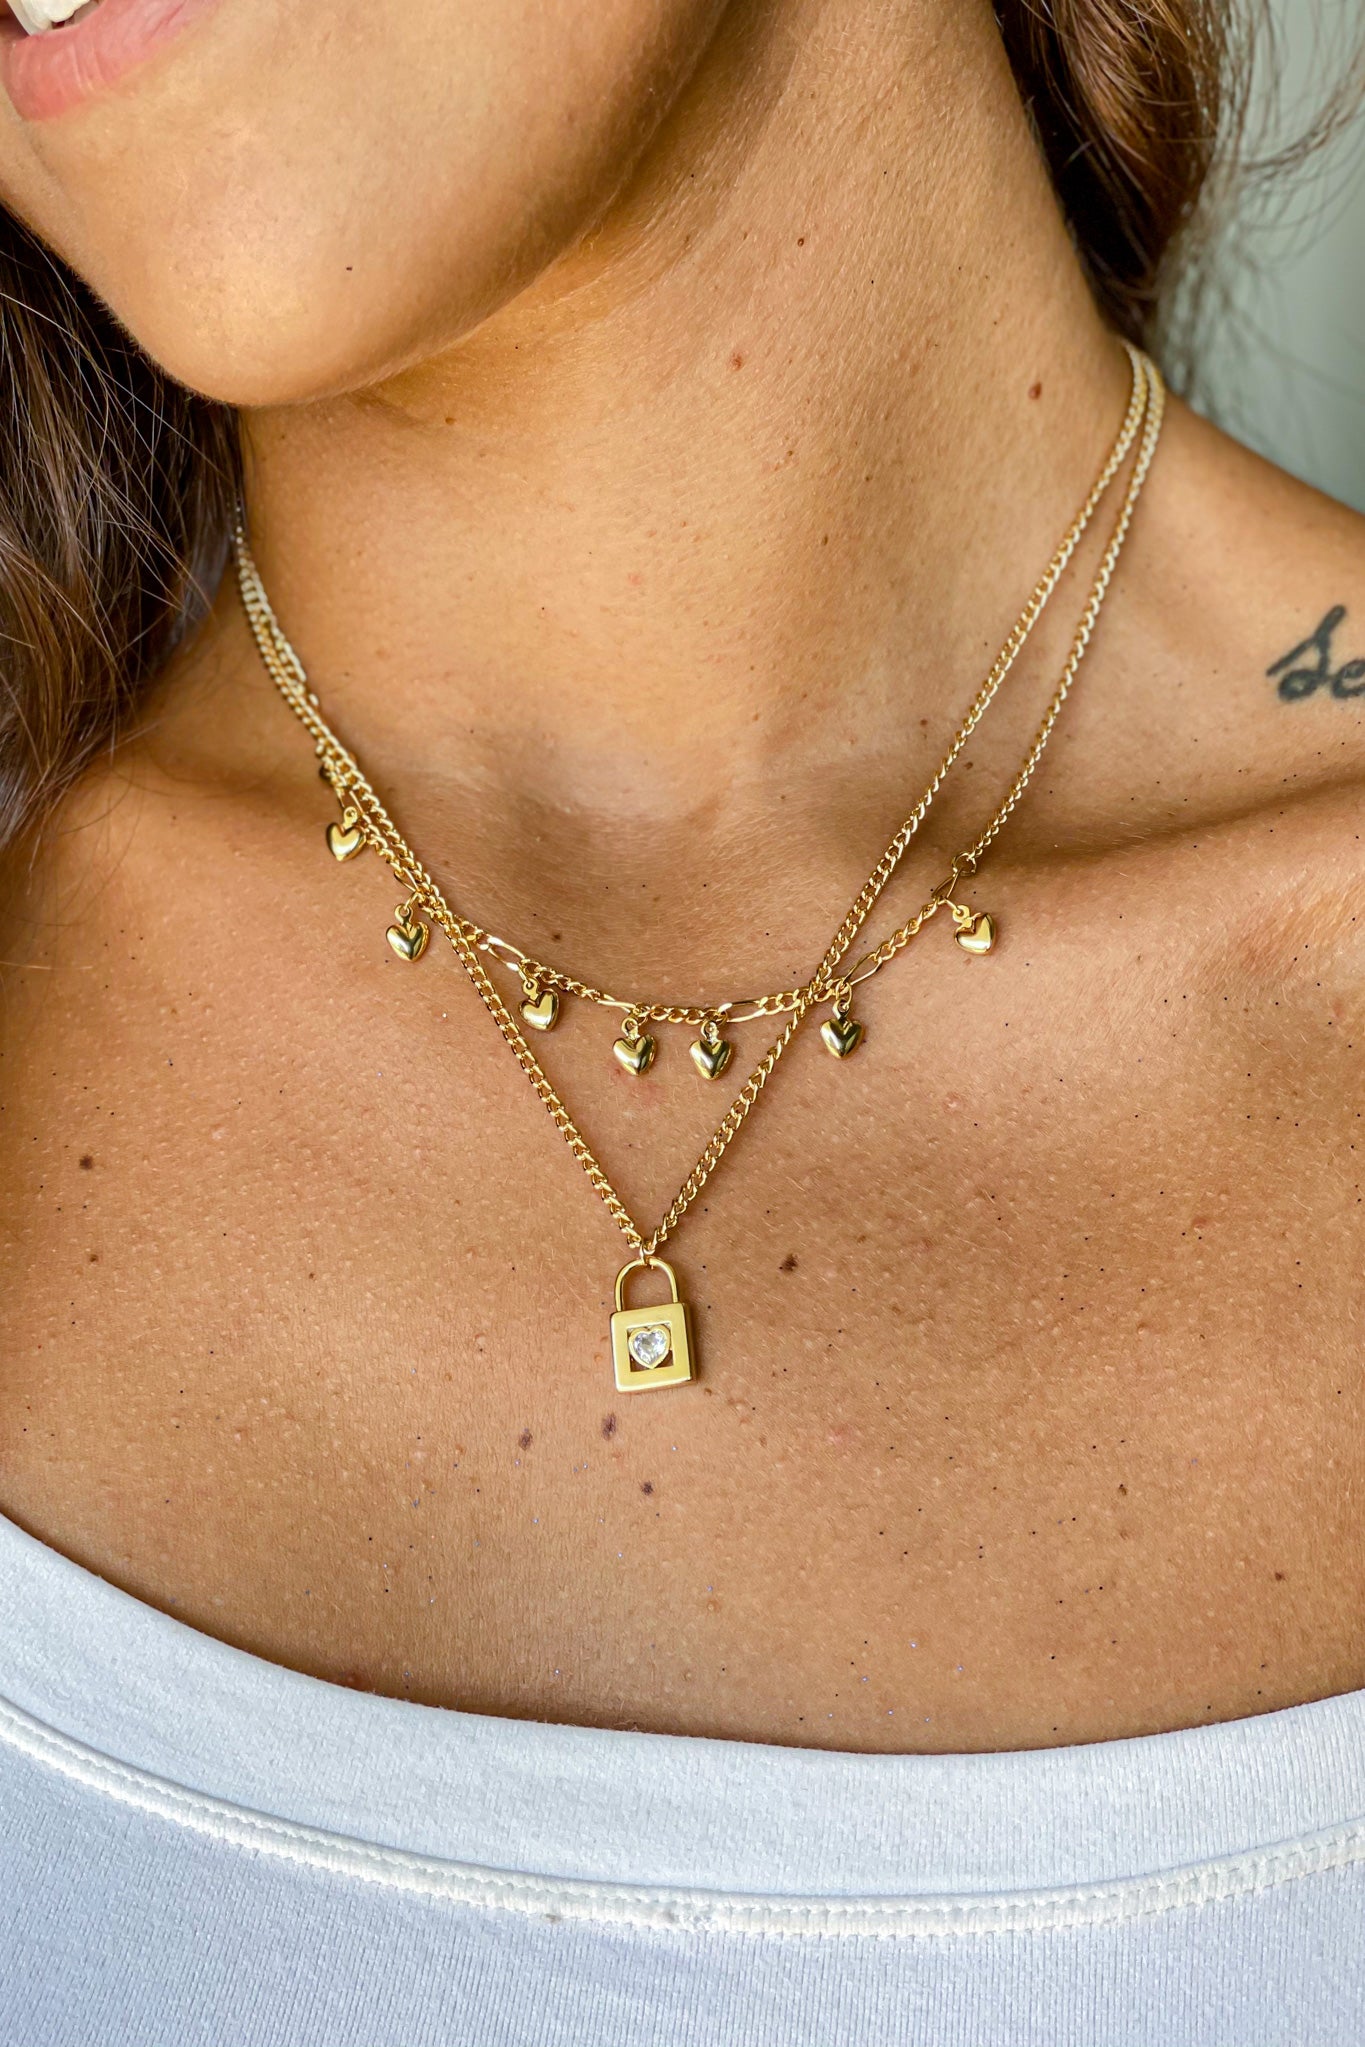 Gold Layered Necklace with Heart Lock